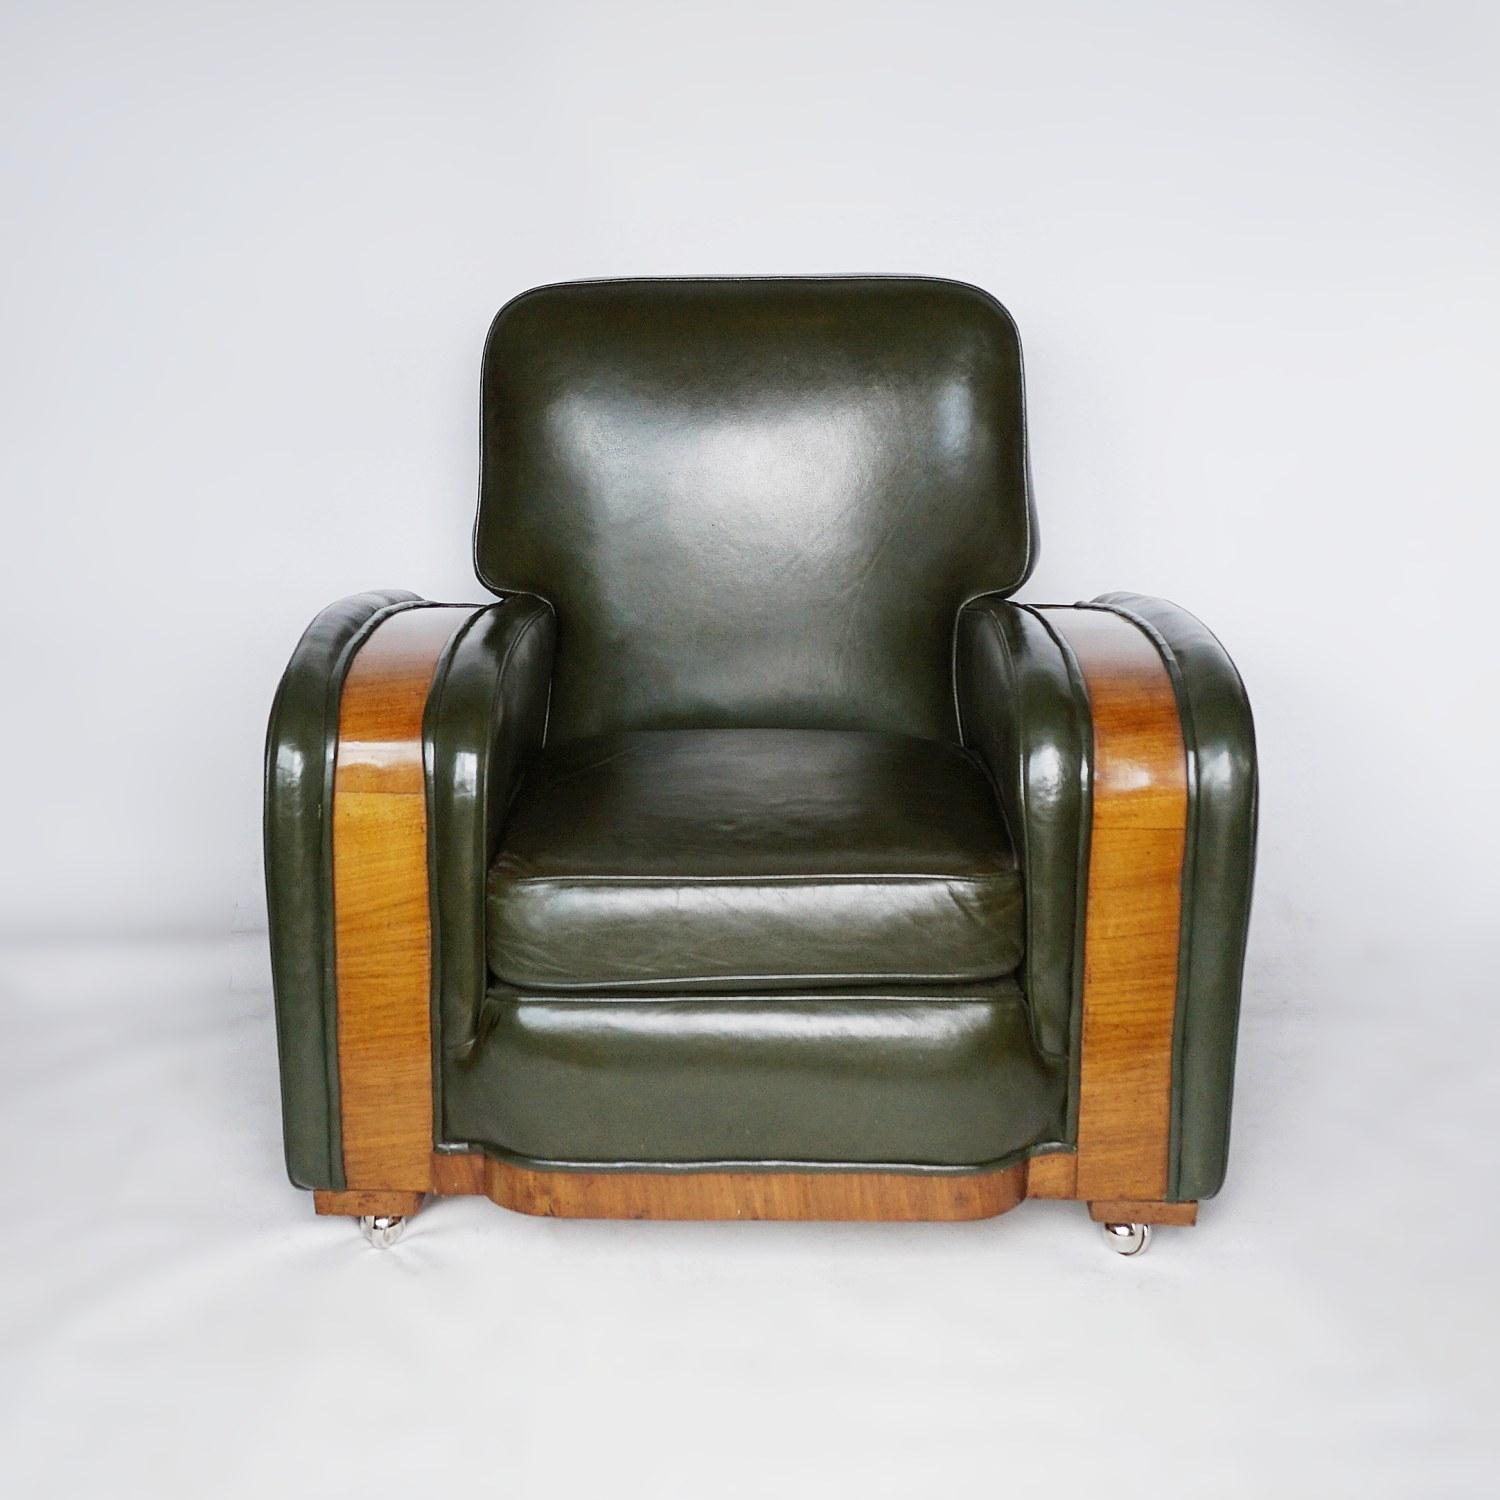 English Pair of Art Deco Tank Chairs Attributed to Heal's of London